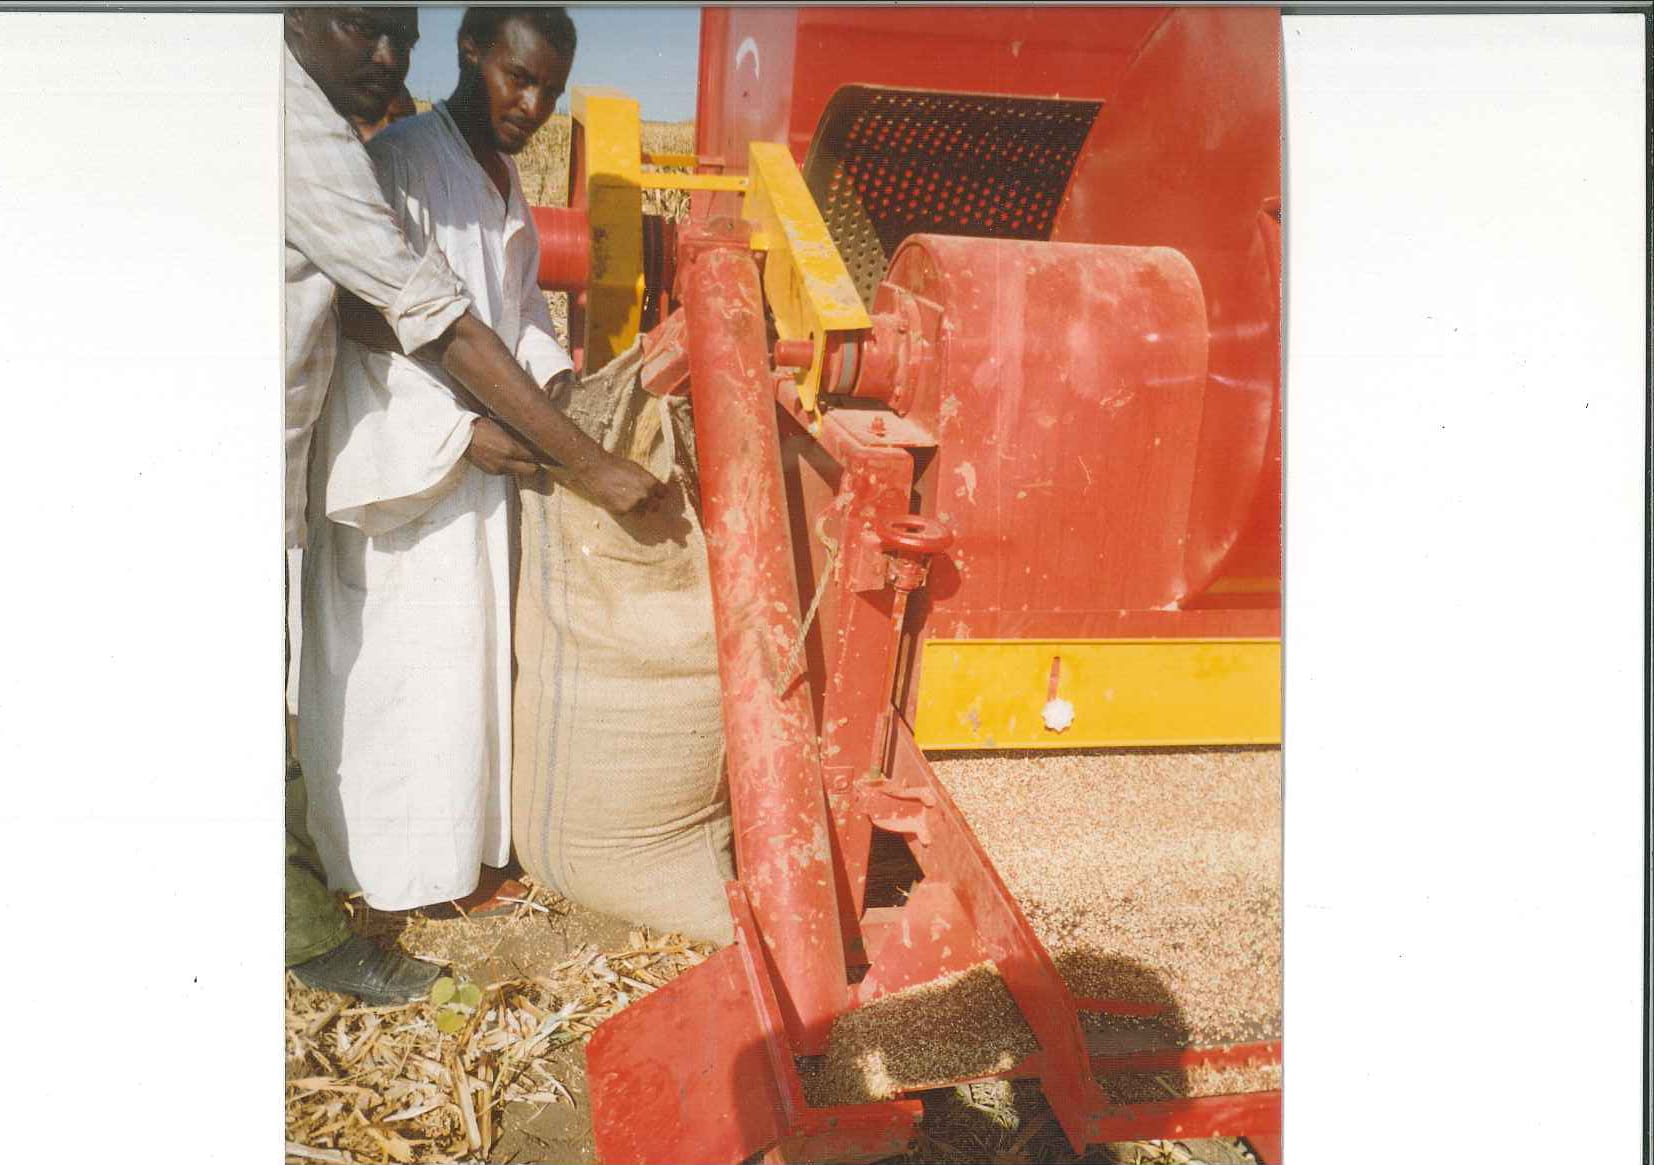  || Abollo Agricultural Machinery